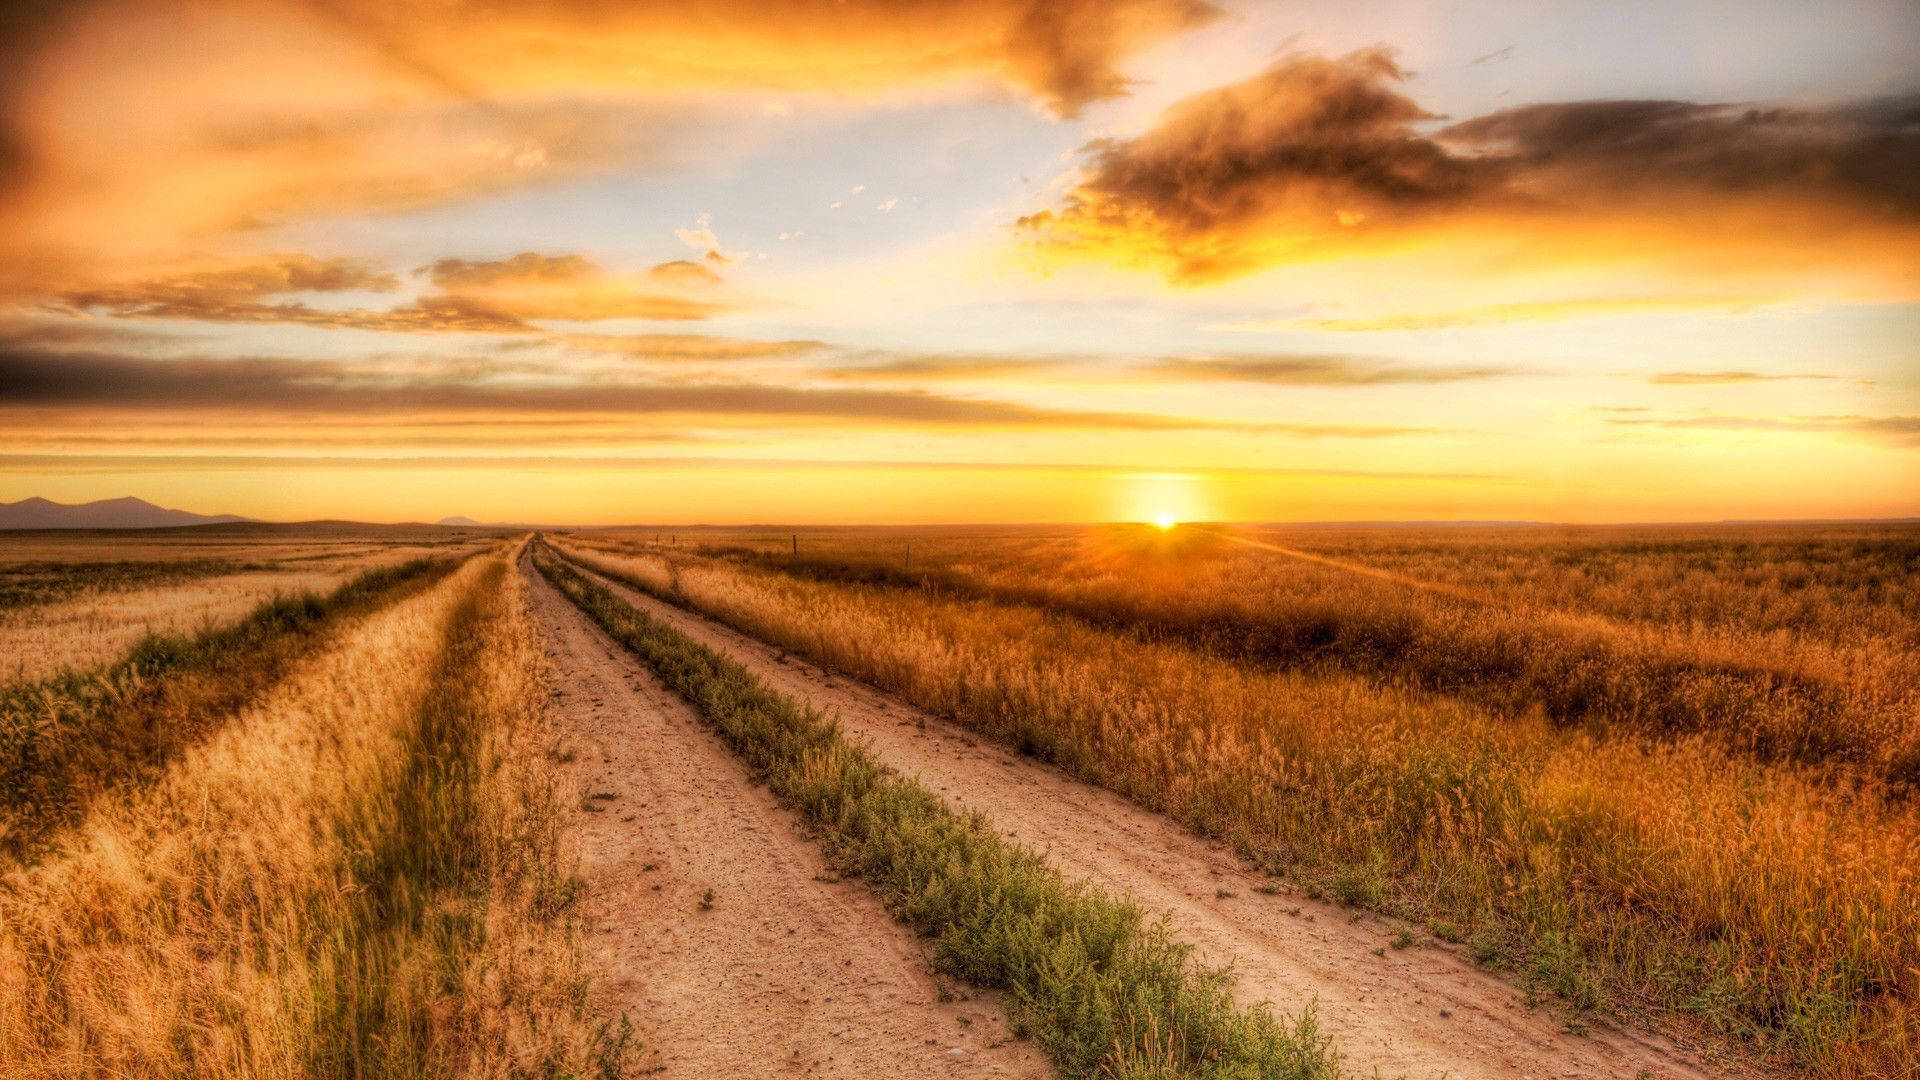 A sunset view of a dirt road in the countryside. Wallpaper